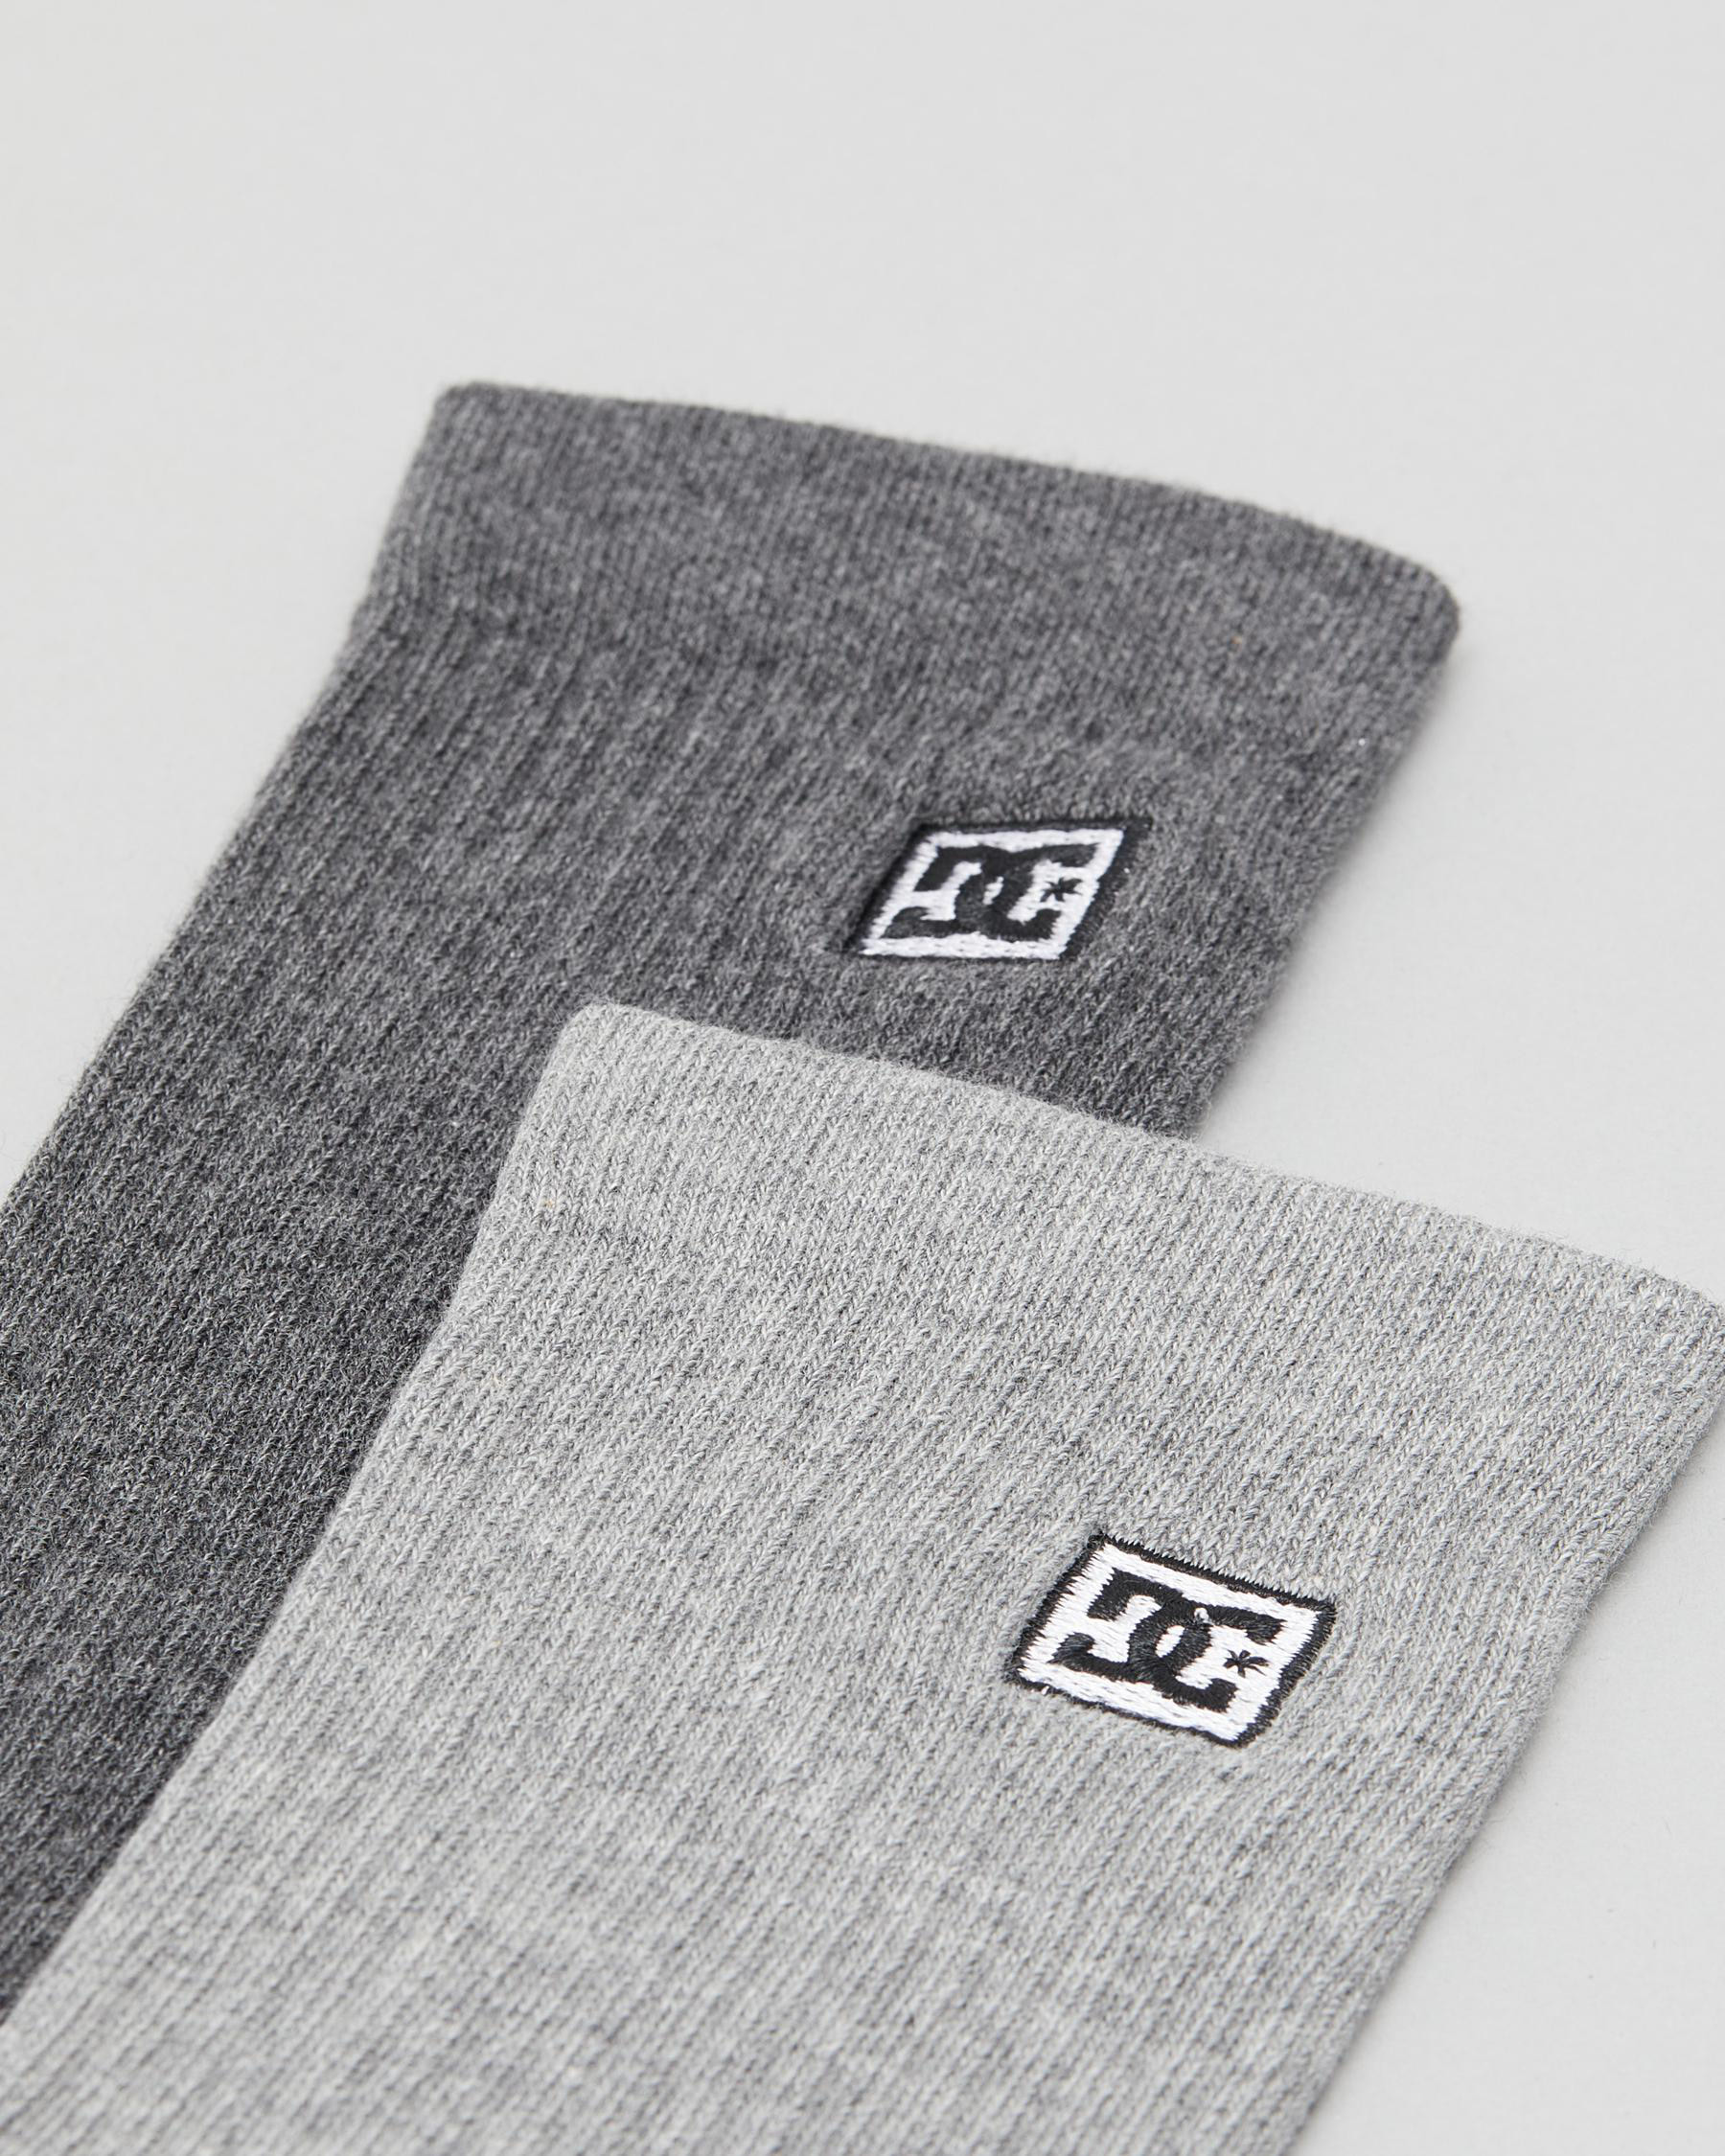 DC Shoes DC Shoe Co Crew Socks 2 Pack In Light Grey Heather - Fast ...